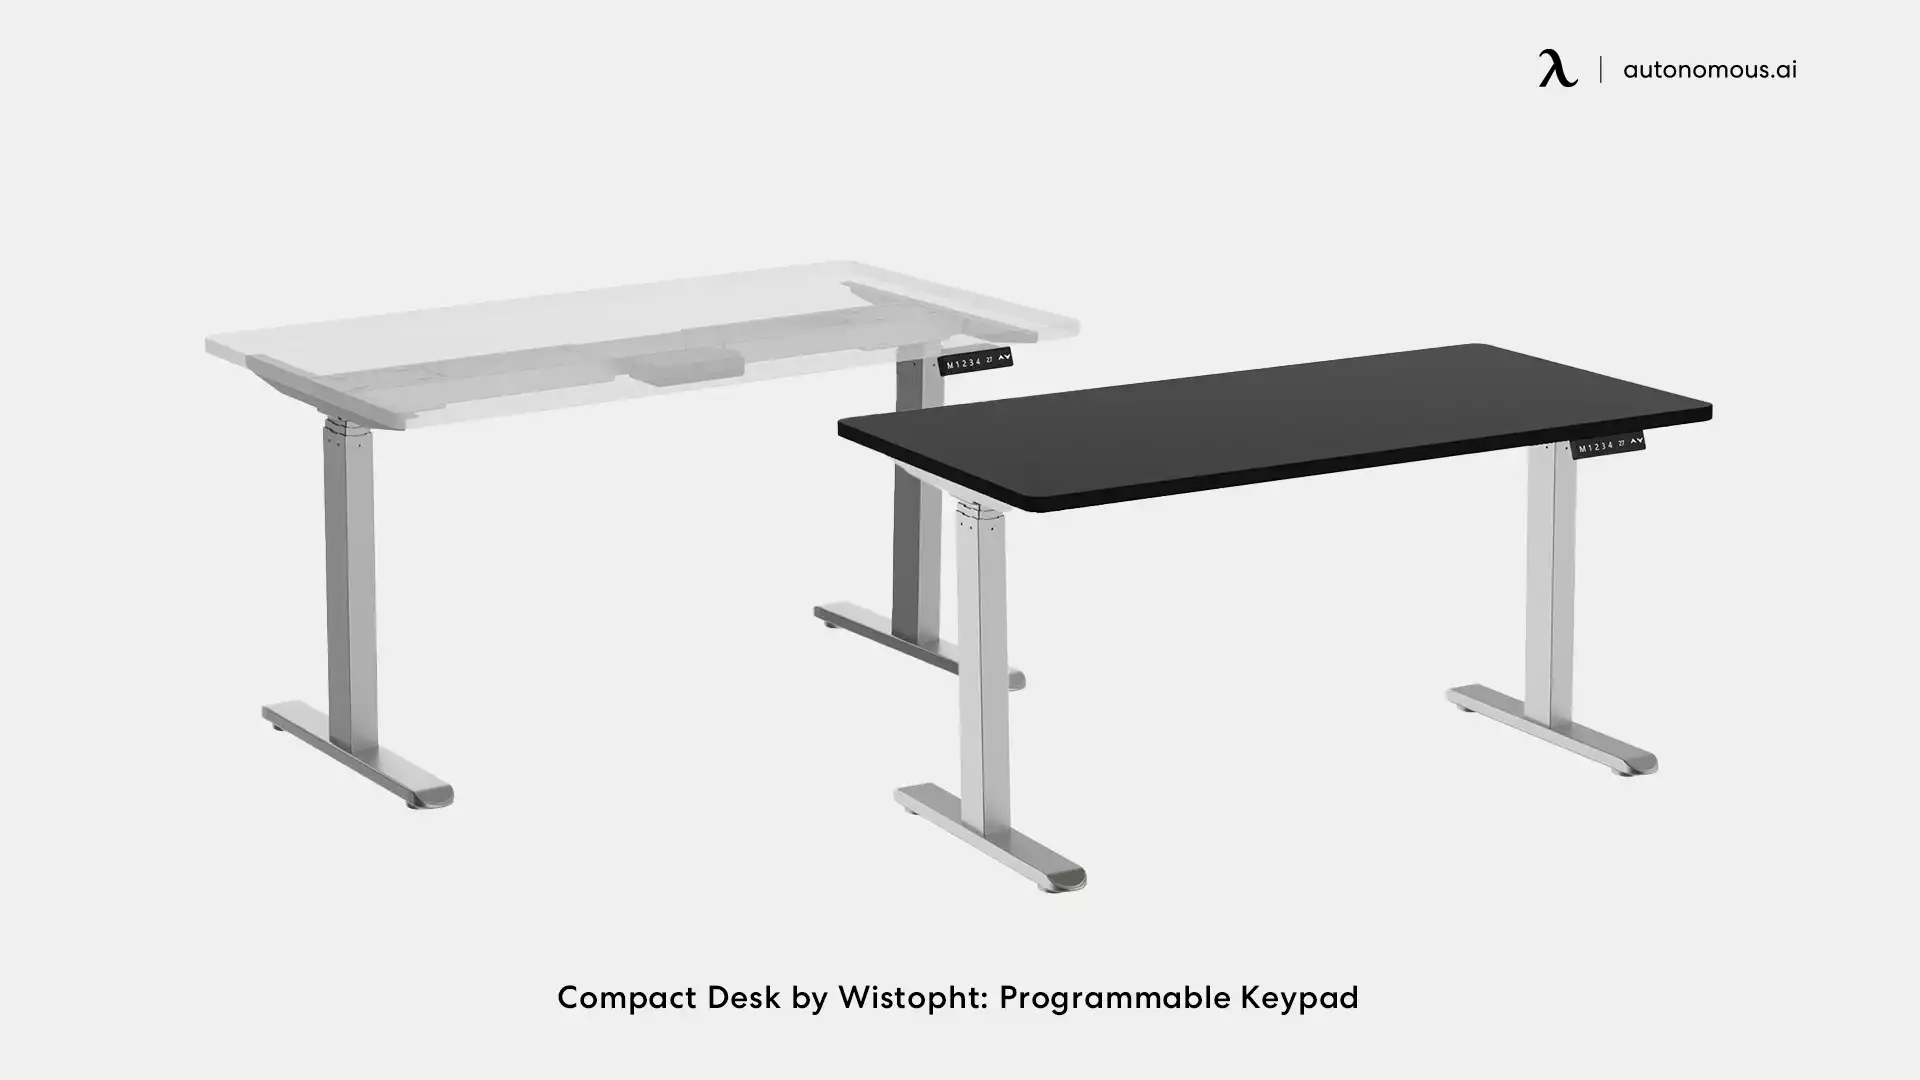 Wistopht Compact Desk with Programmable Keypad